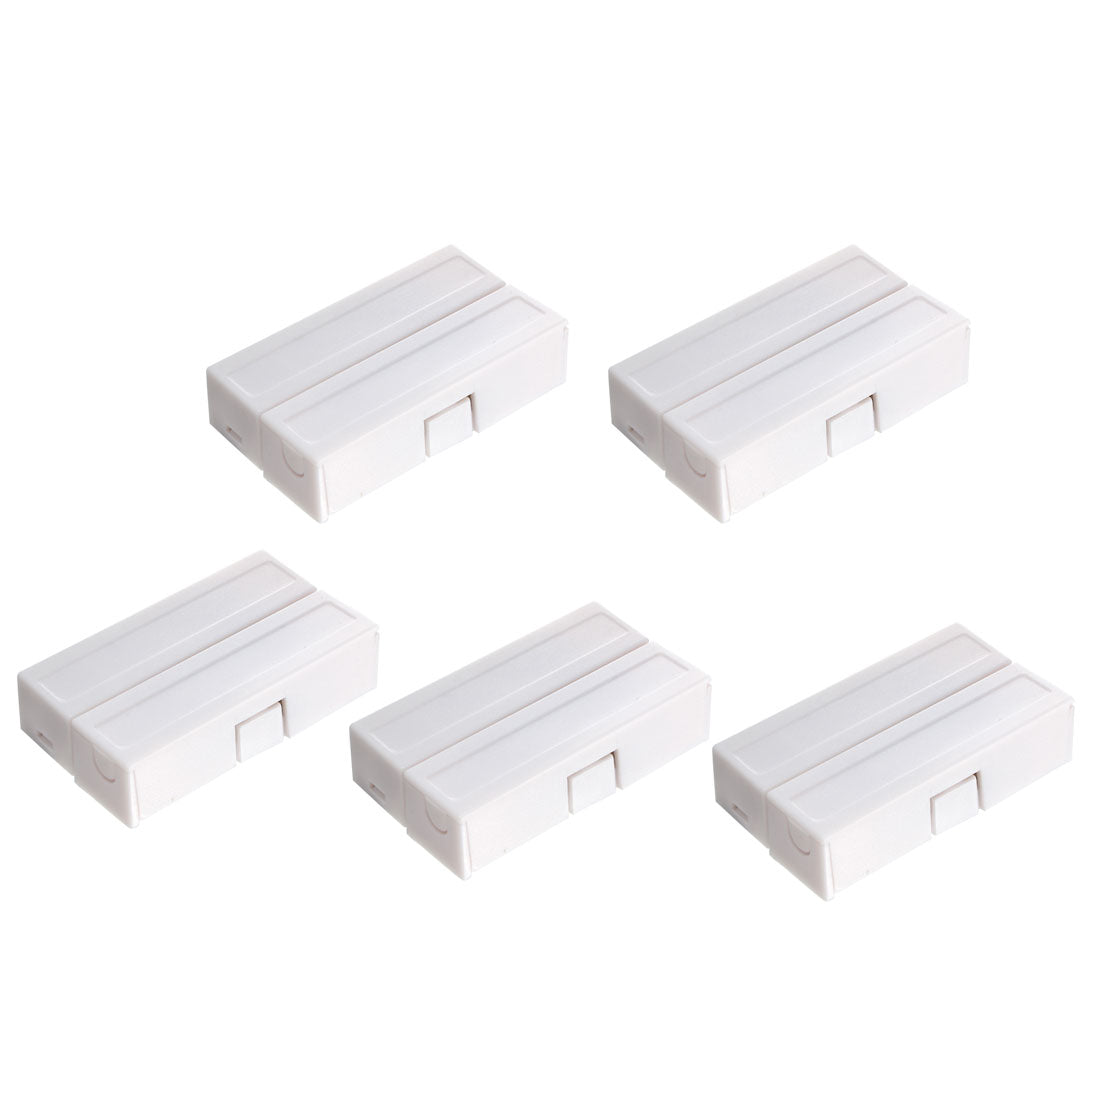 uxcell Uxcell 5pcs MC-51 Surface Mount Wired NC Door Contact Sensor Alarm Magnetic Reed Switch White